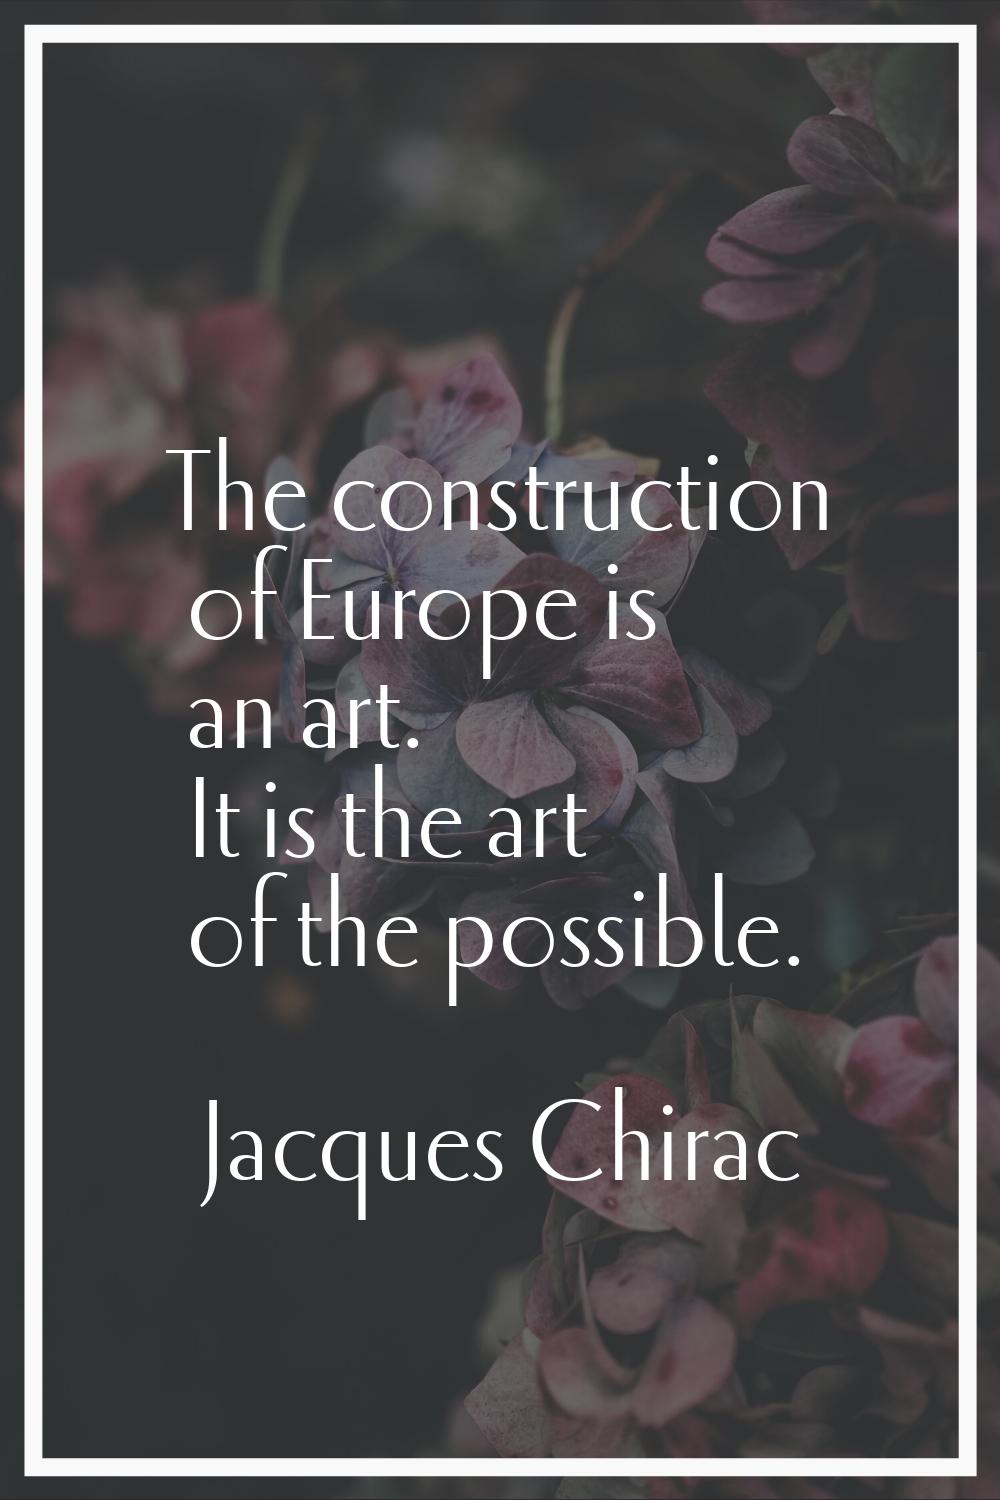 The construction of Europe is an art. It is the art of the possible.